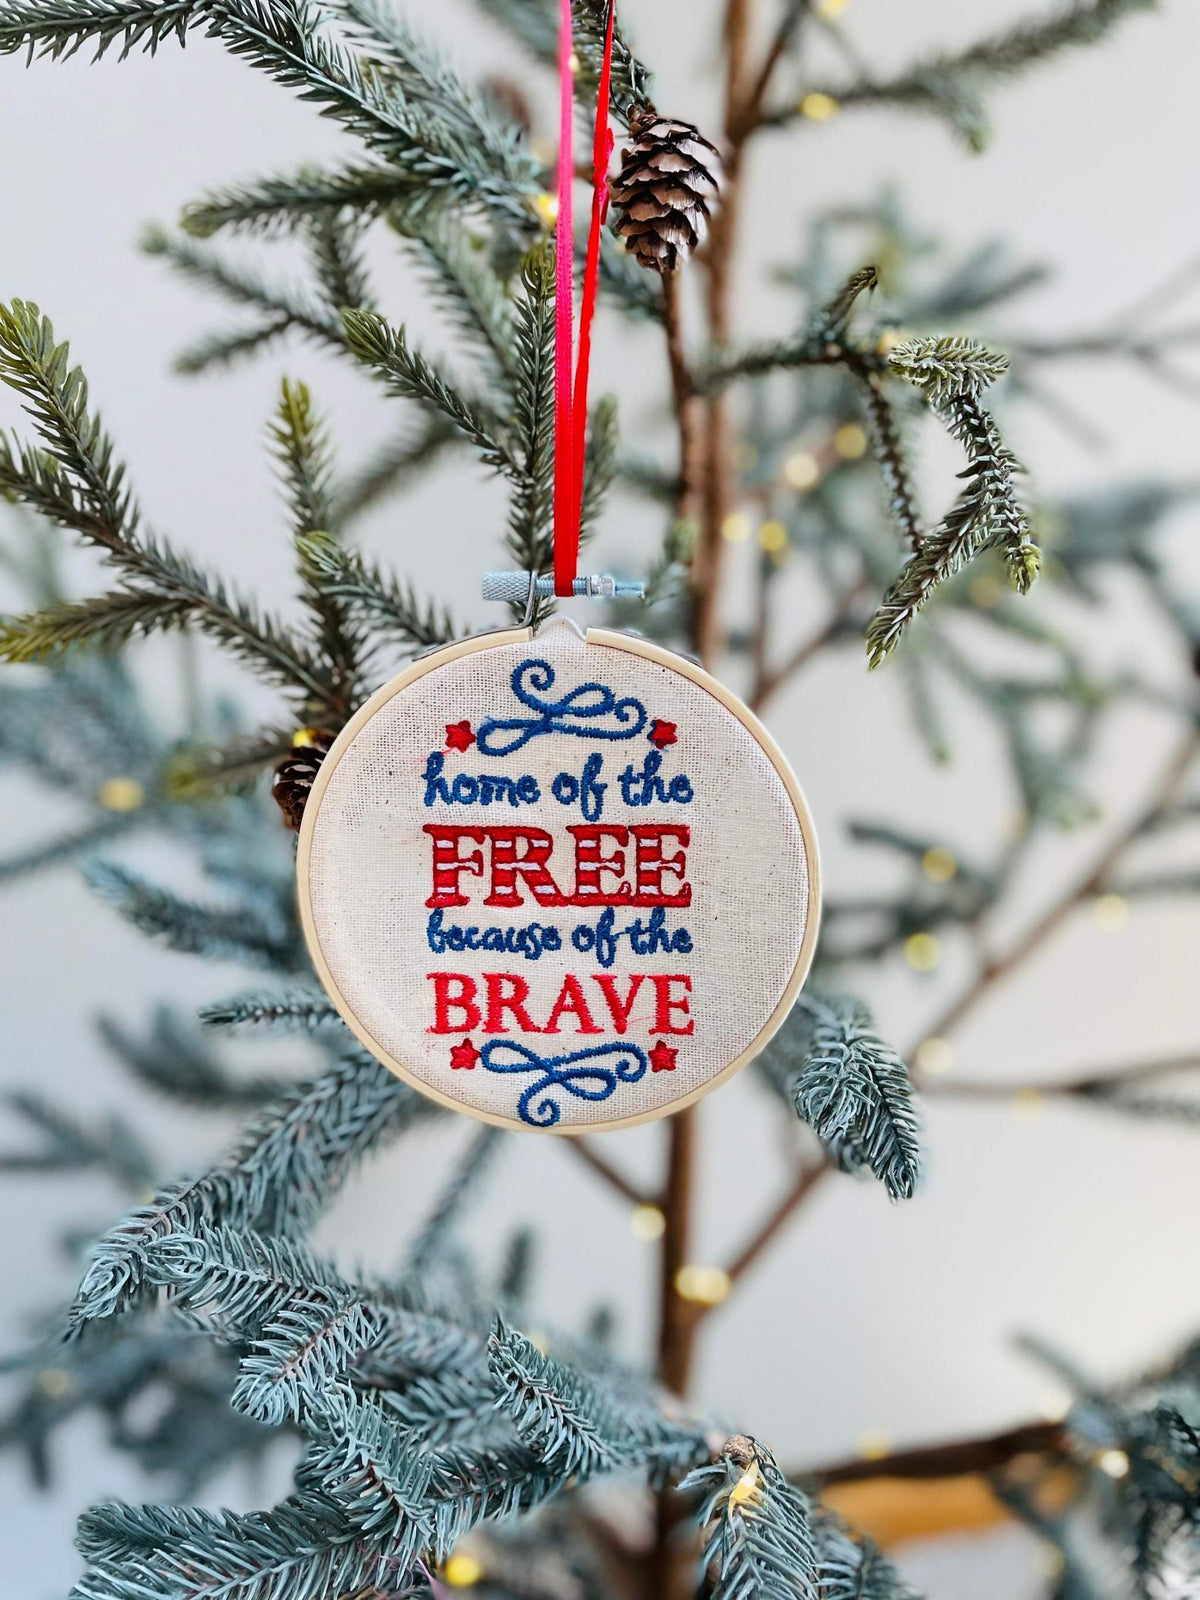 Remember those who have fought for freedom with this beautiful ornament. Ornament is machine embroidered. Embroidery hoop is 4”. This is the perfect gift for a milit